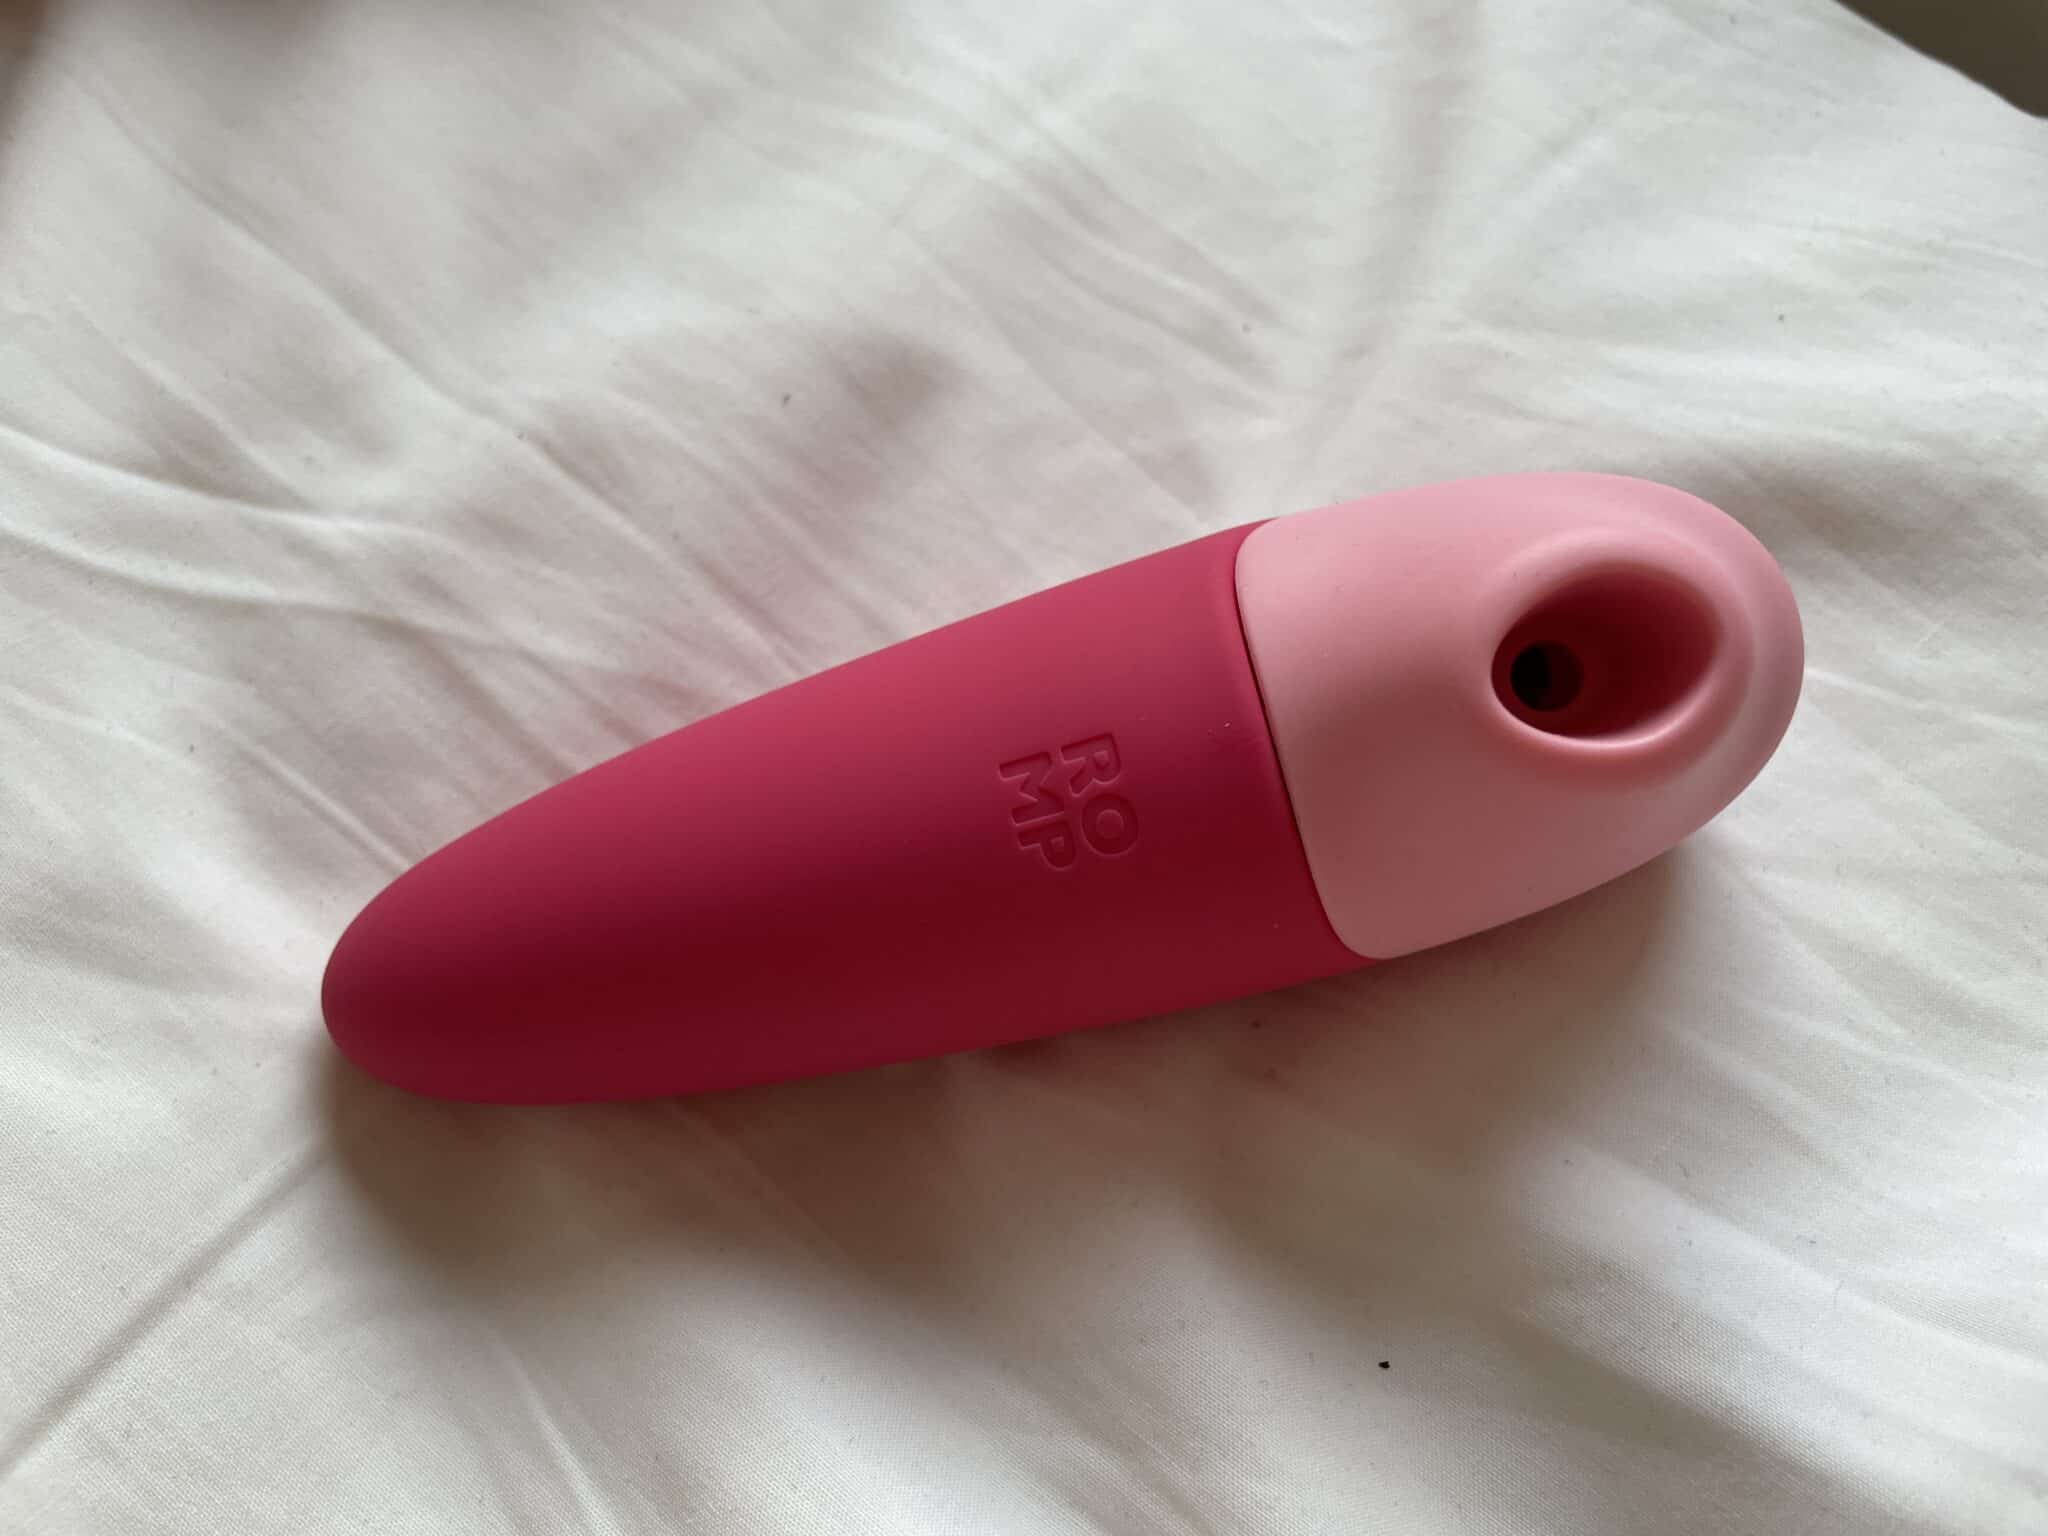 ROMP Shine X Clitoral Suction Stimulator Reviewing the design